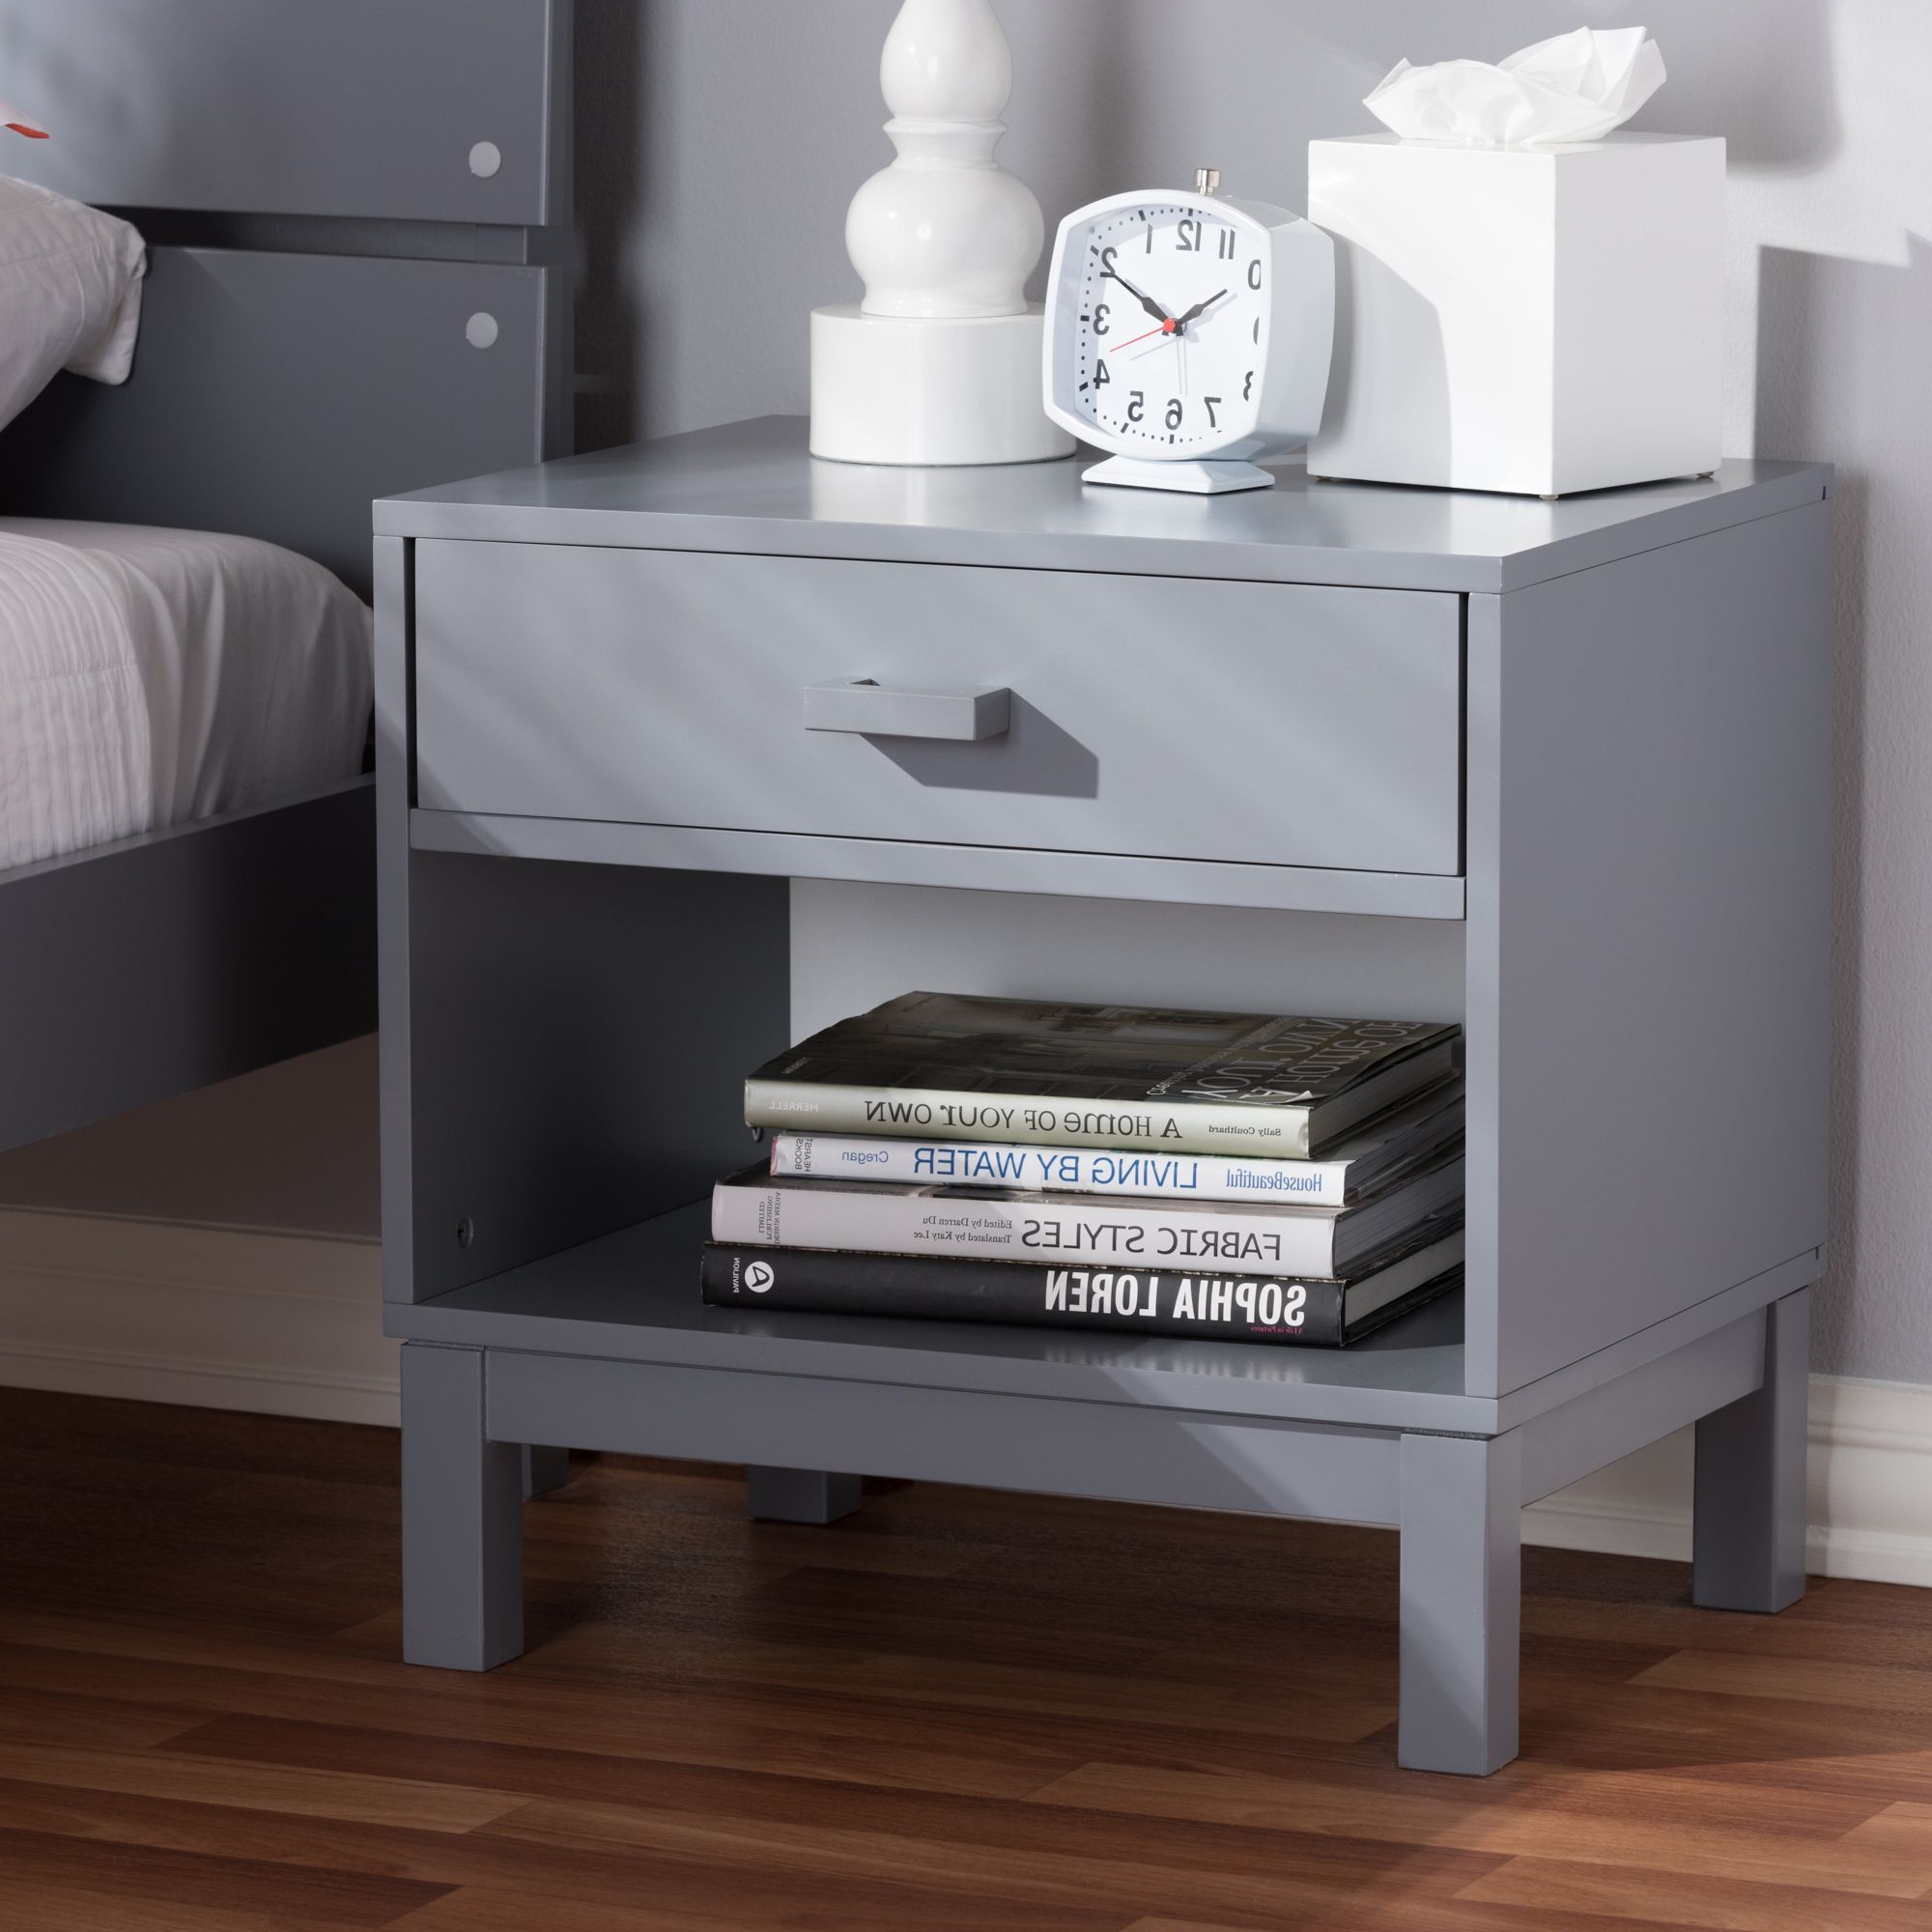 2018 Smoke Gray Wood 1 Drawer Desks Throughout Baxton Studio Deirdre Modern And Contemporary Grey Wood 1 Drawer (View 6 of 15)